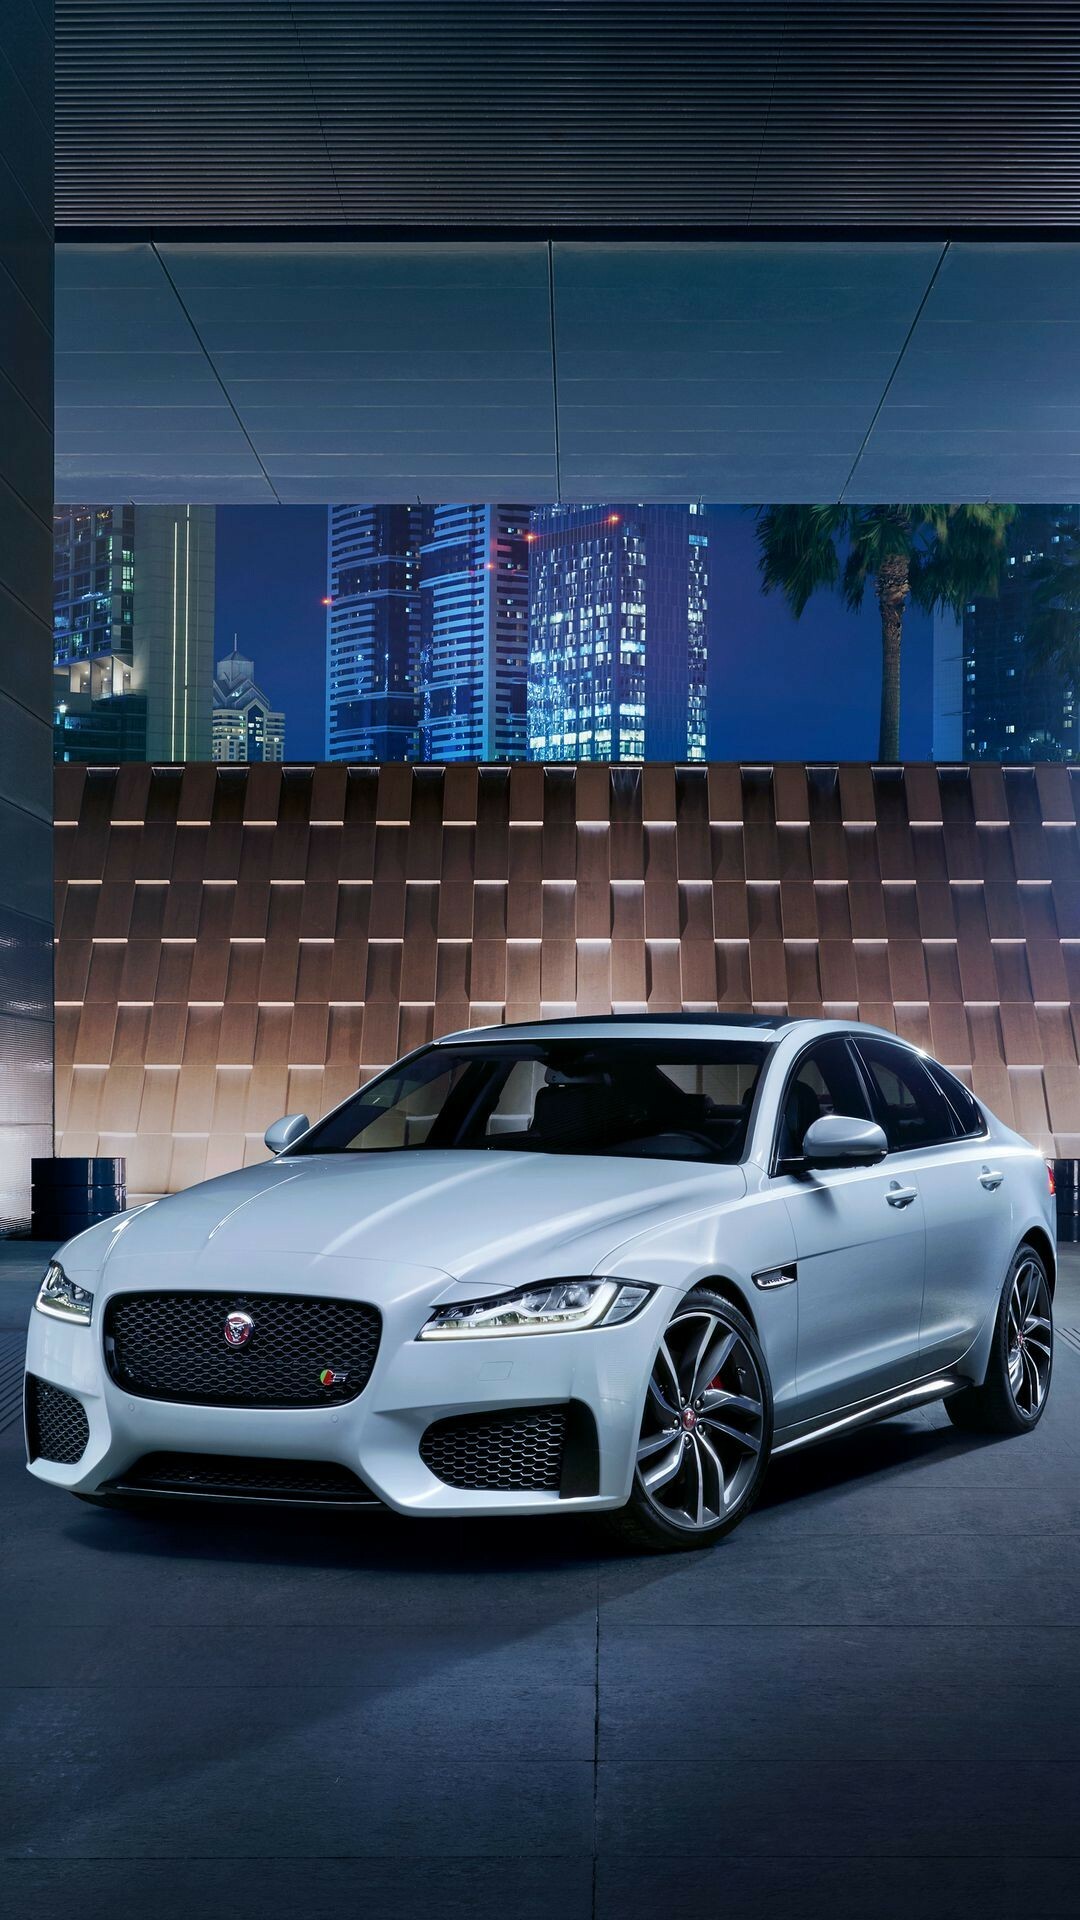 Jaguar Cars: Automaker, Known for luxurious sedans and athletic sports cars. 1080x1920 Full HD Background.